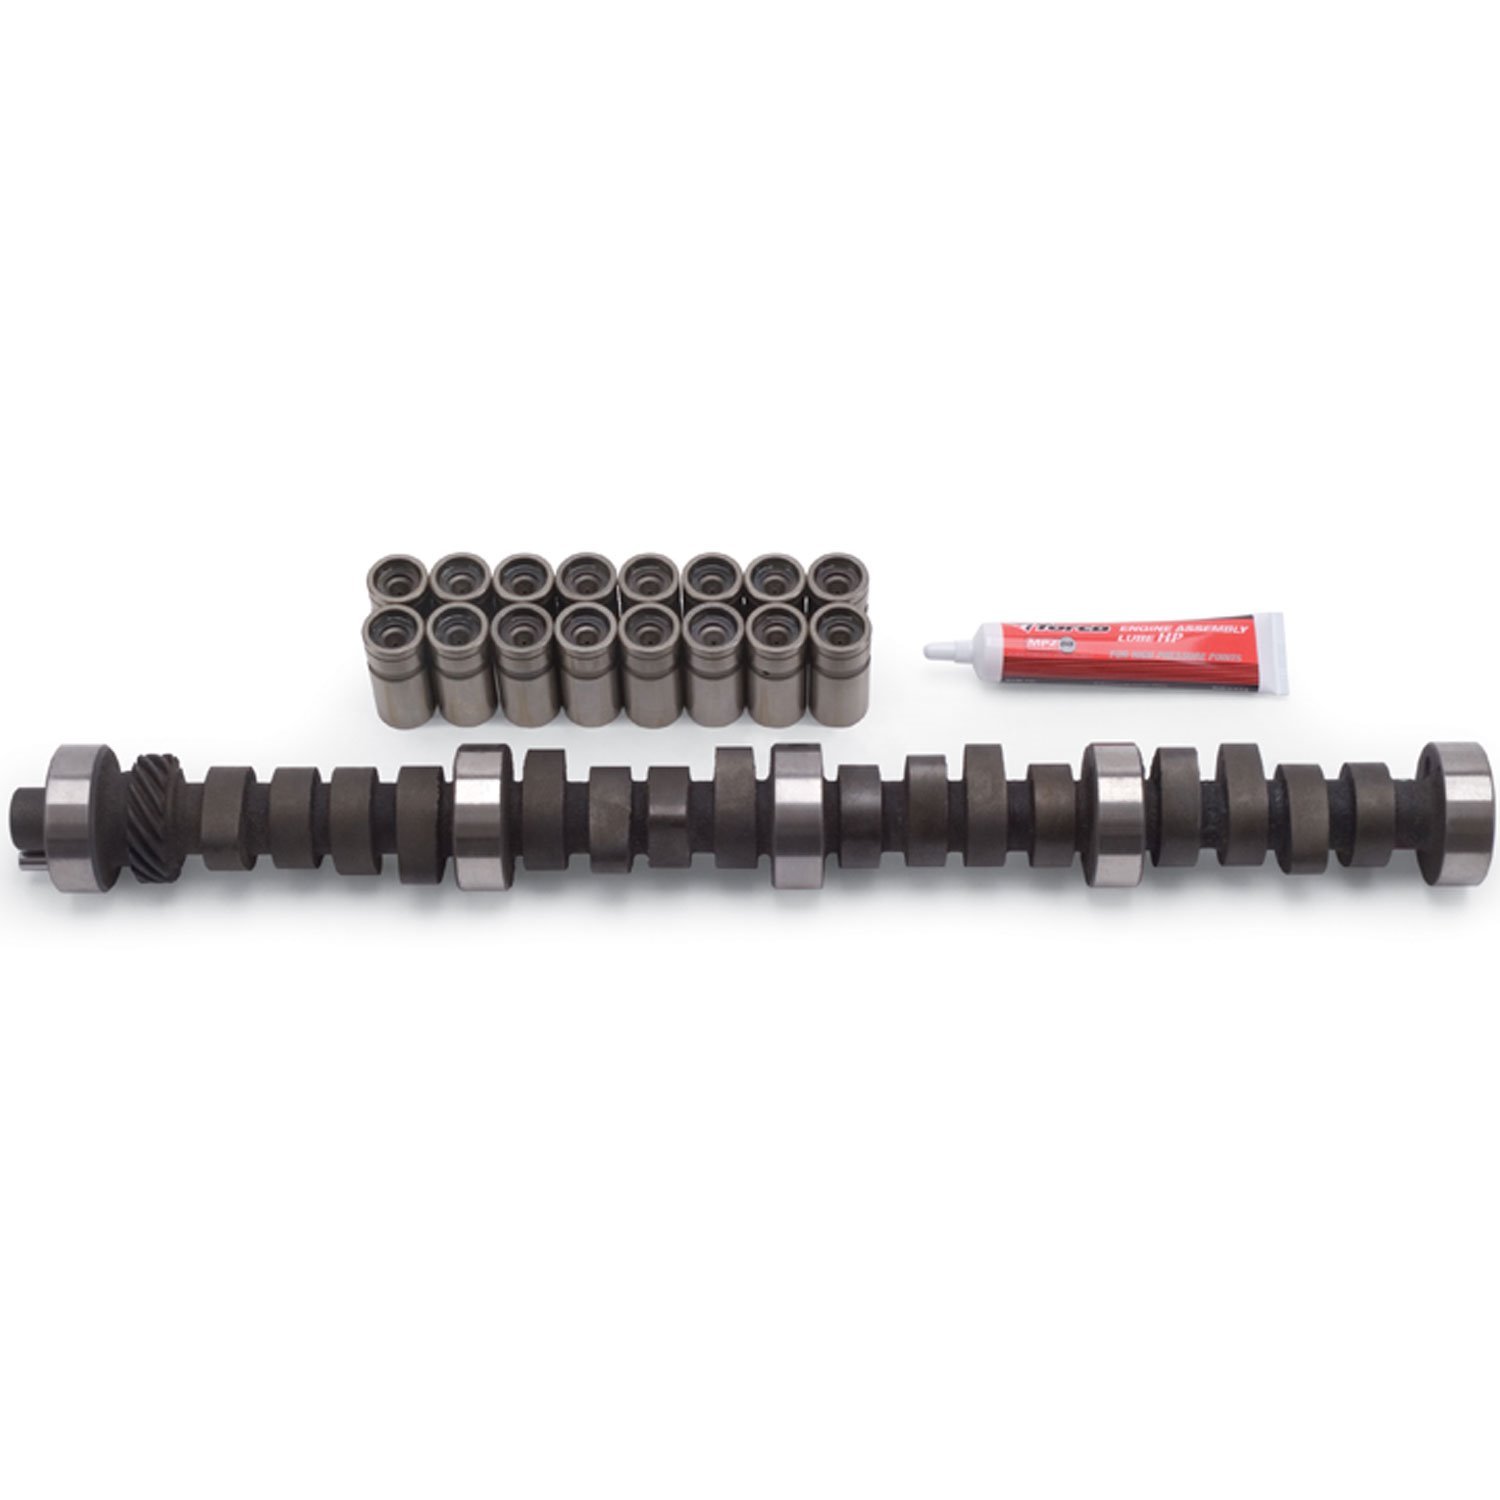 Performer RPM Camshaft Kit for Small Block Ford 289-302